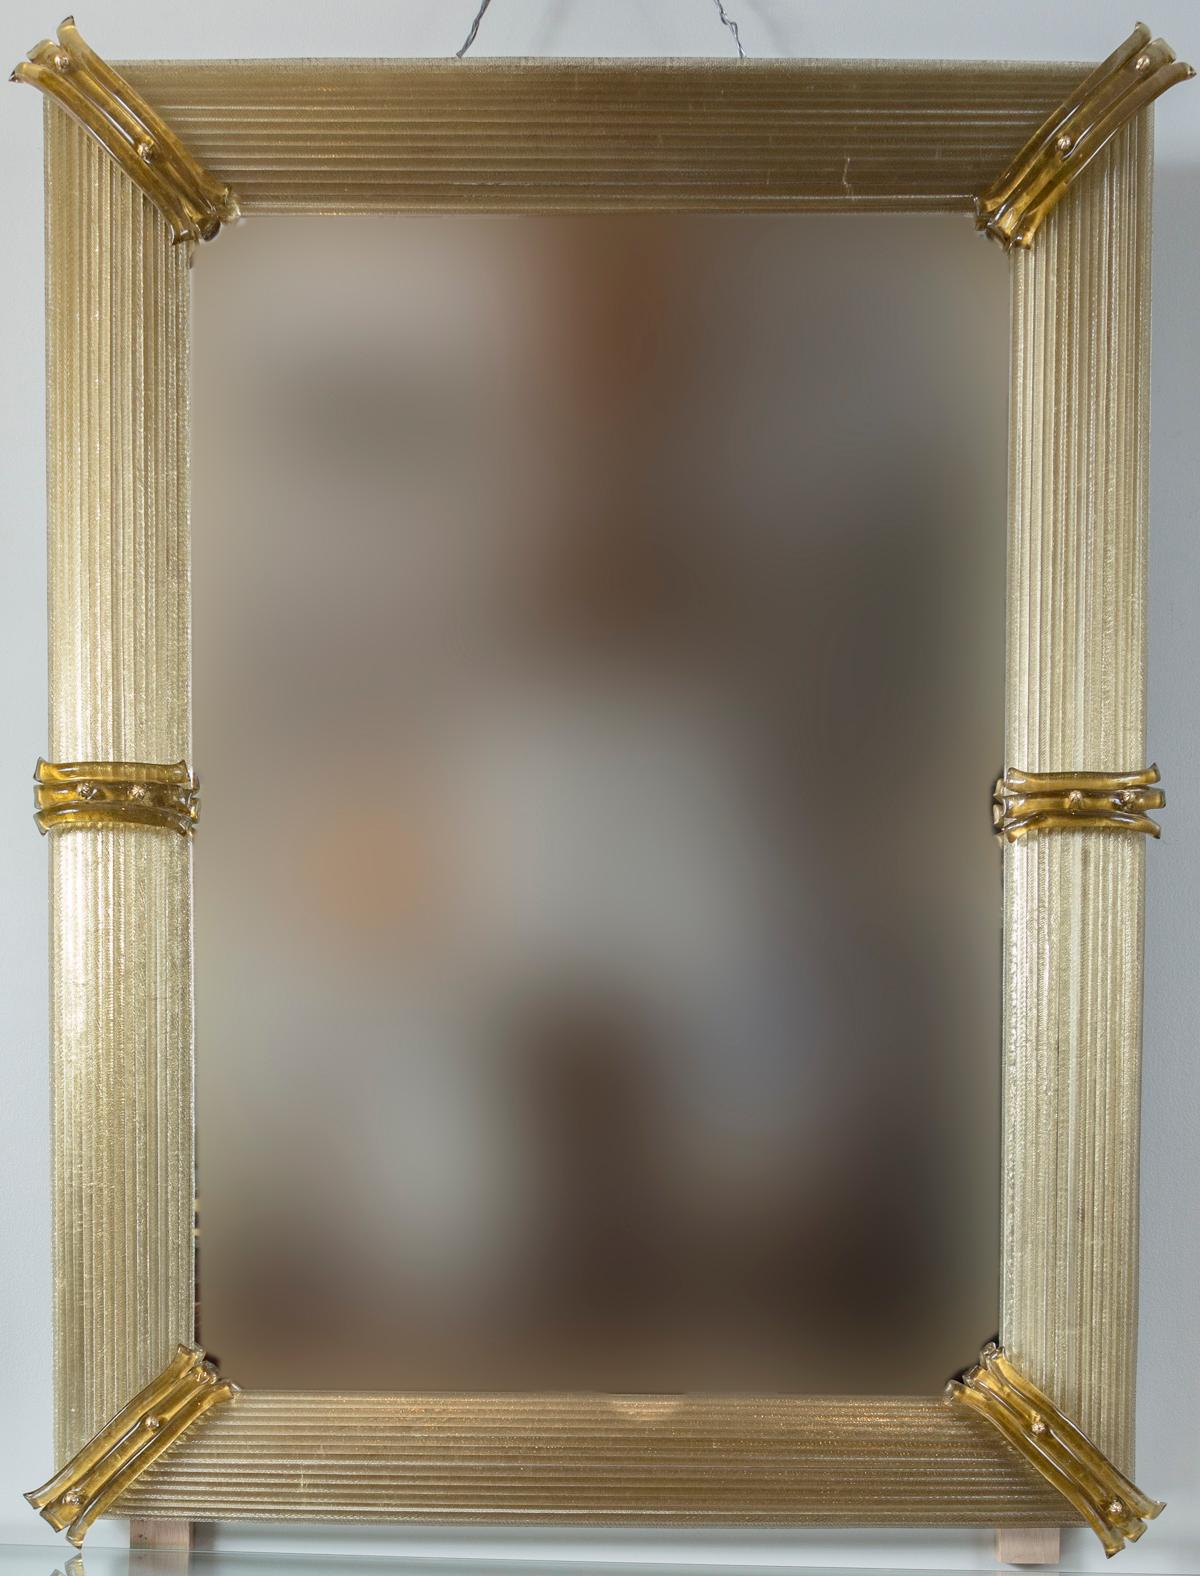 Lovely custom artisan blown taupe glass framed mirrors, frame comprised of long blown twisting straw rods
Weight approx 60 lbs, (crate to ship provided )
Date: Contemporary
Origin: Murano, Italy
Condition: Excellent
Dimensions: 38 1/2” long x